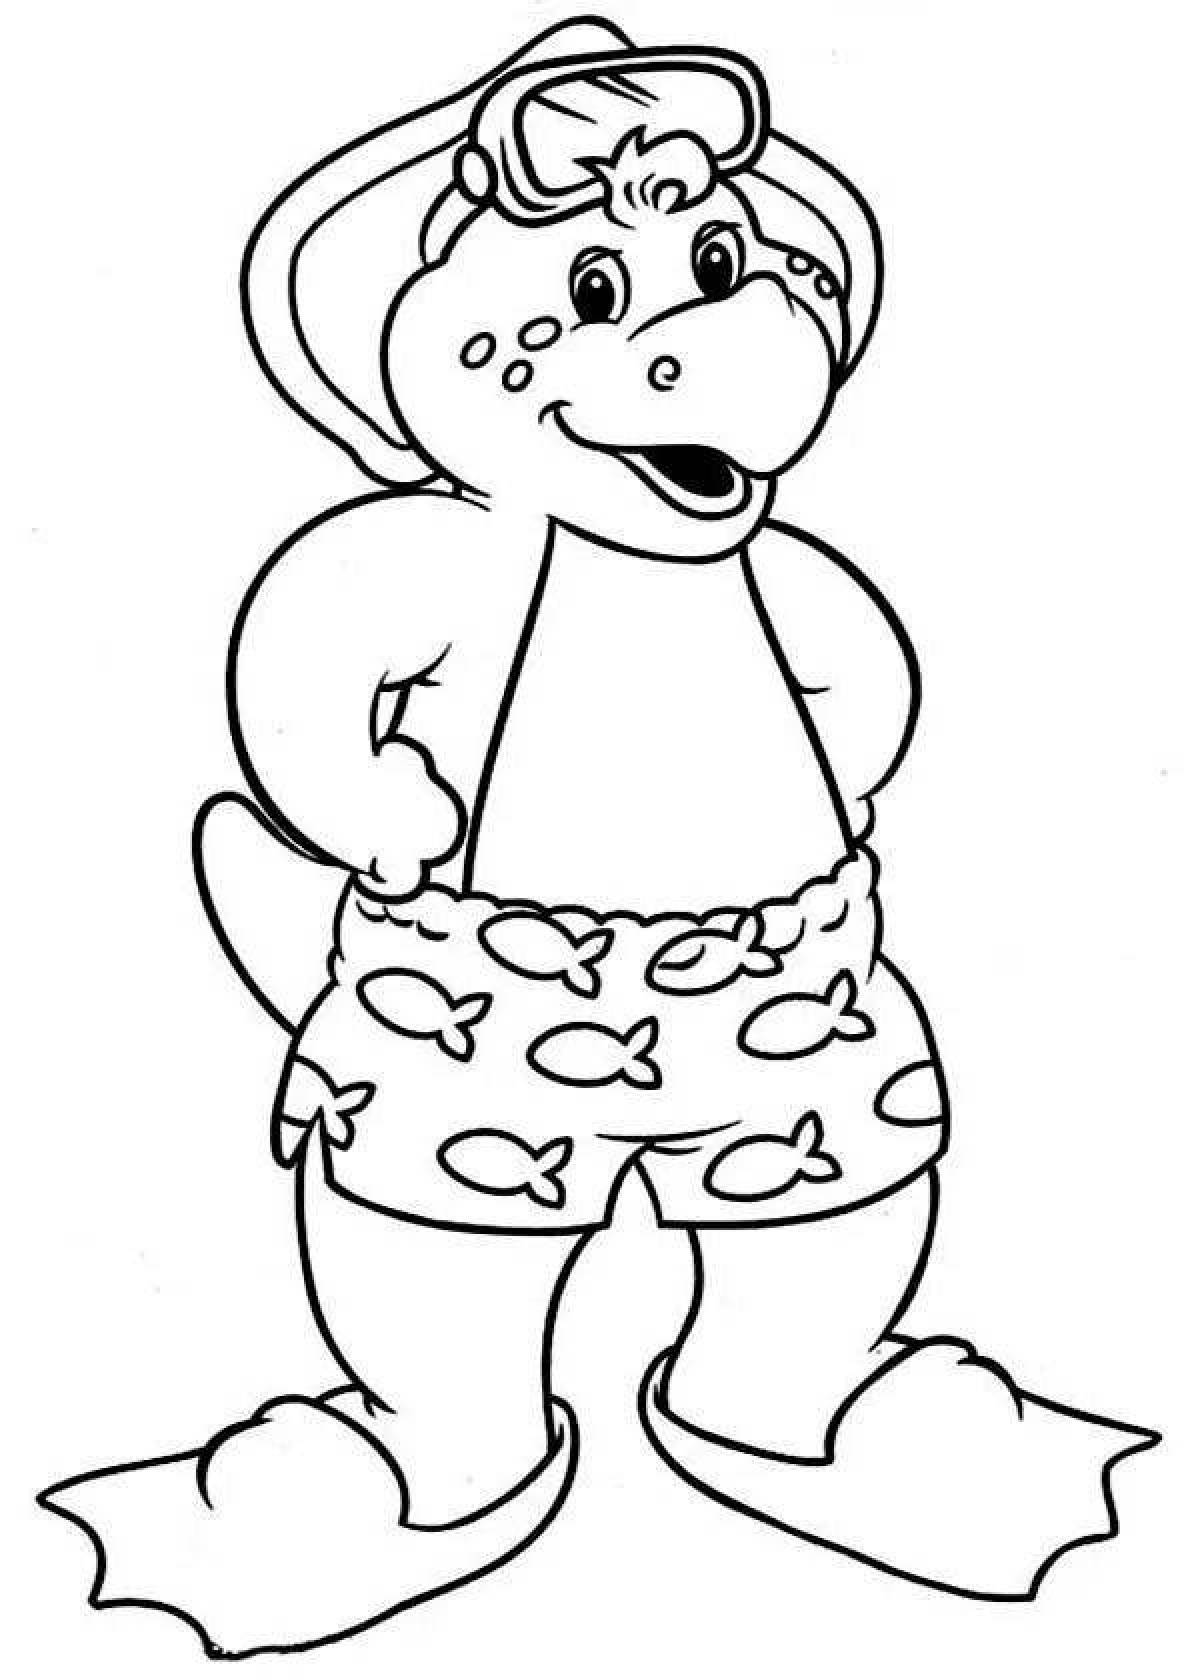 Barney's funny coloring book